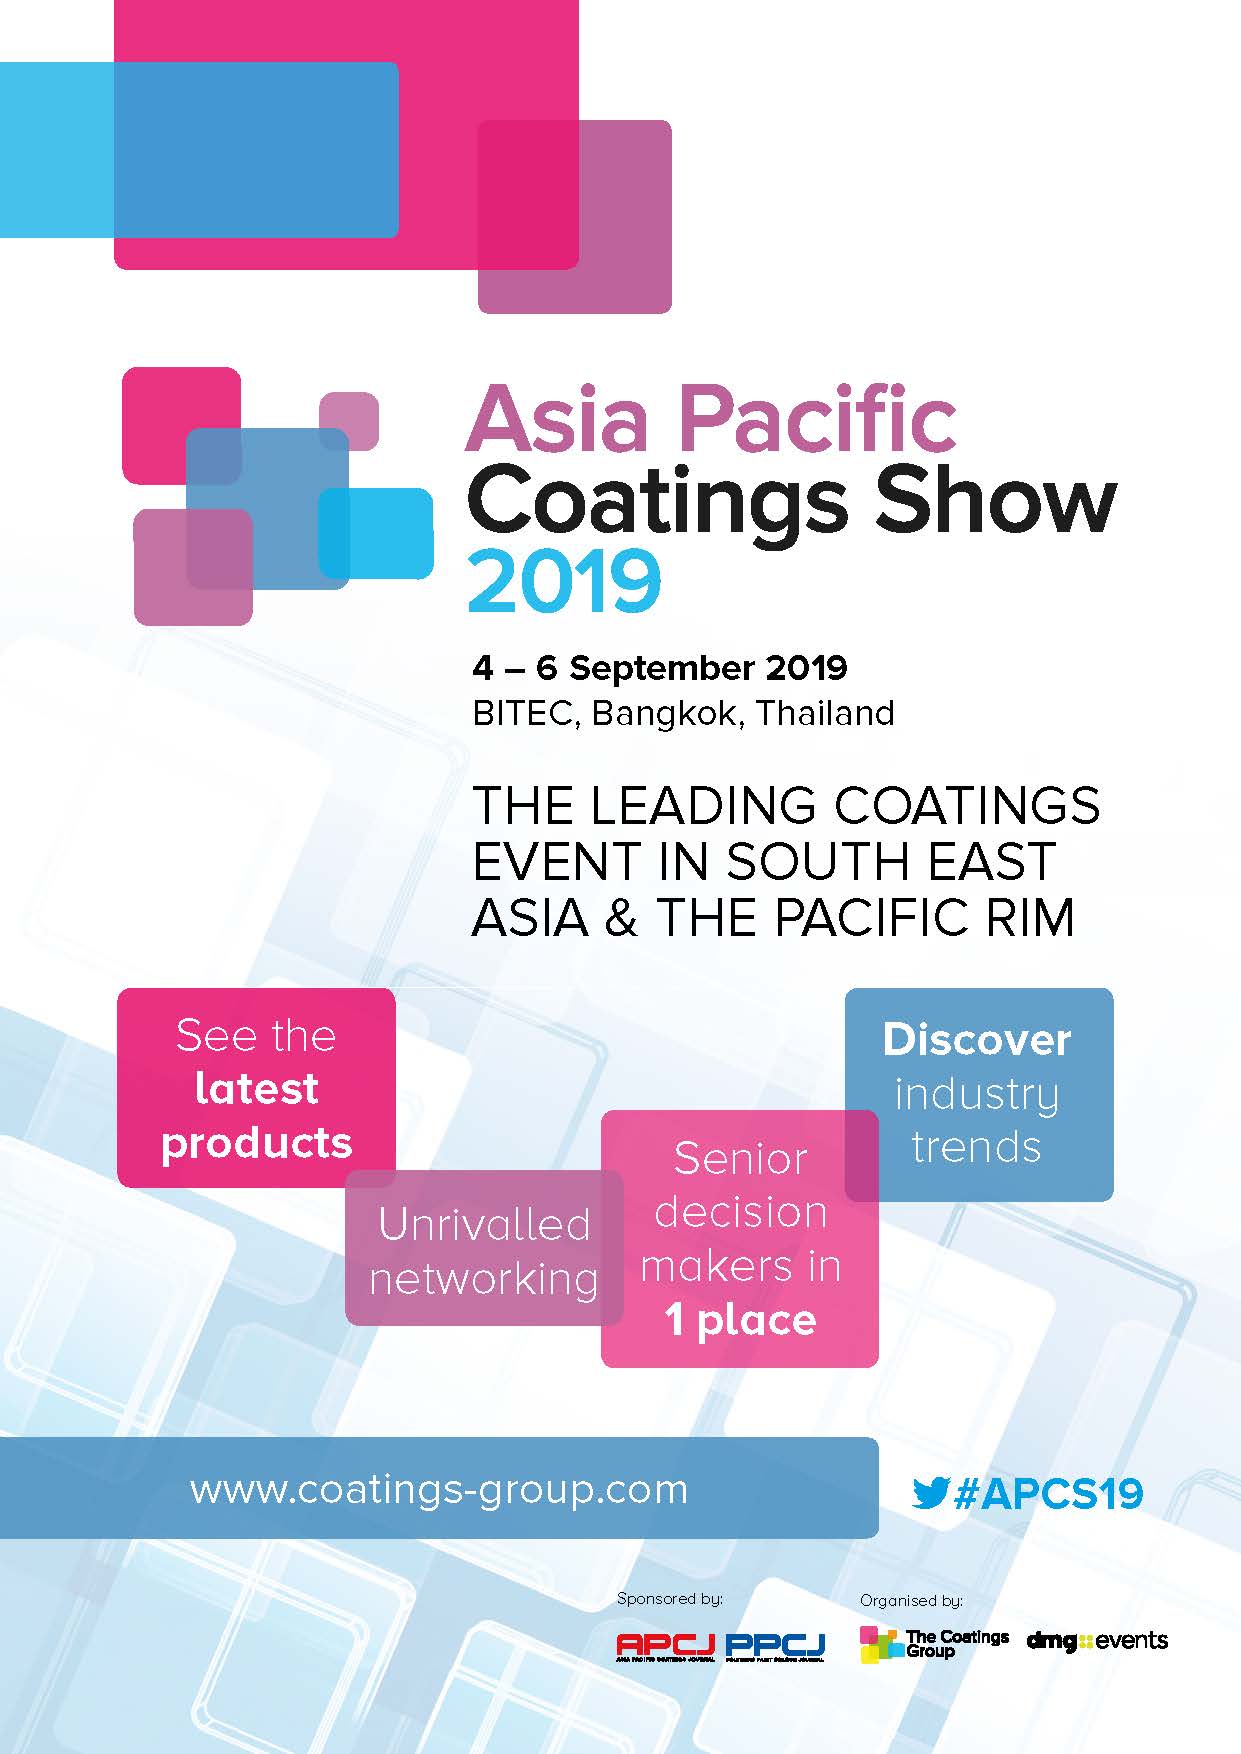 Asia Pacific Coating 2019